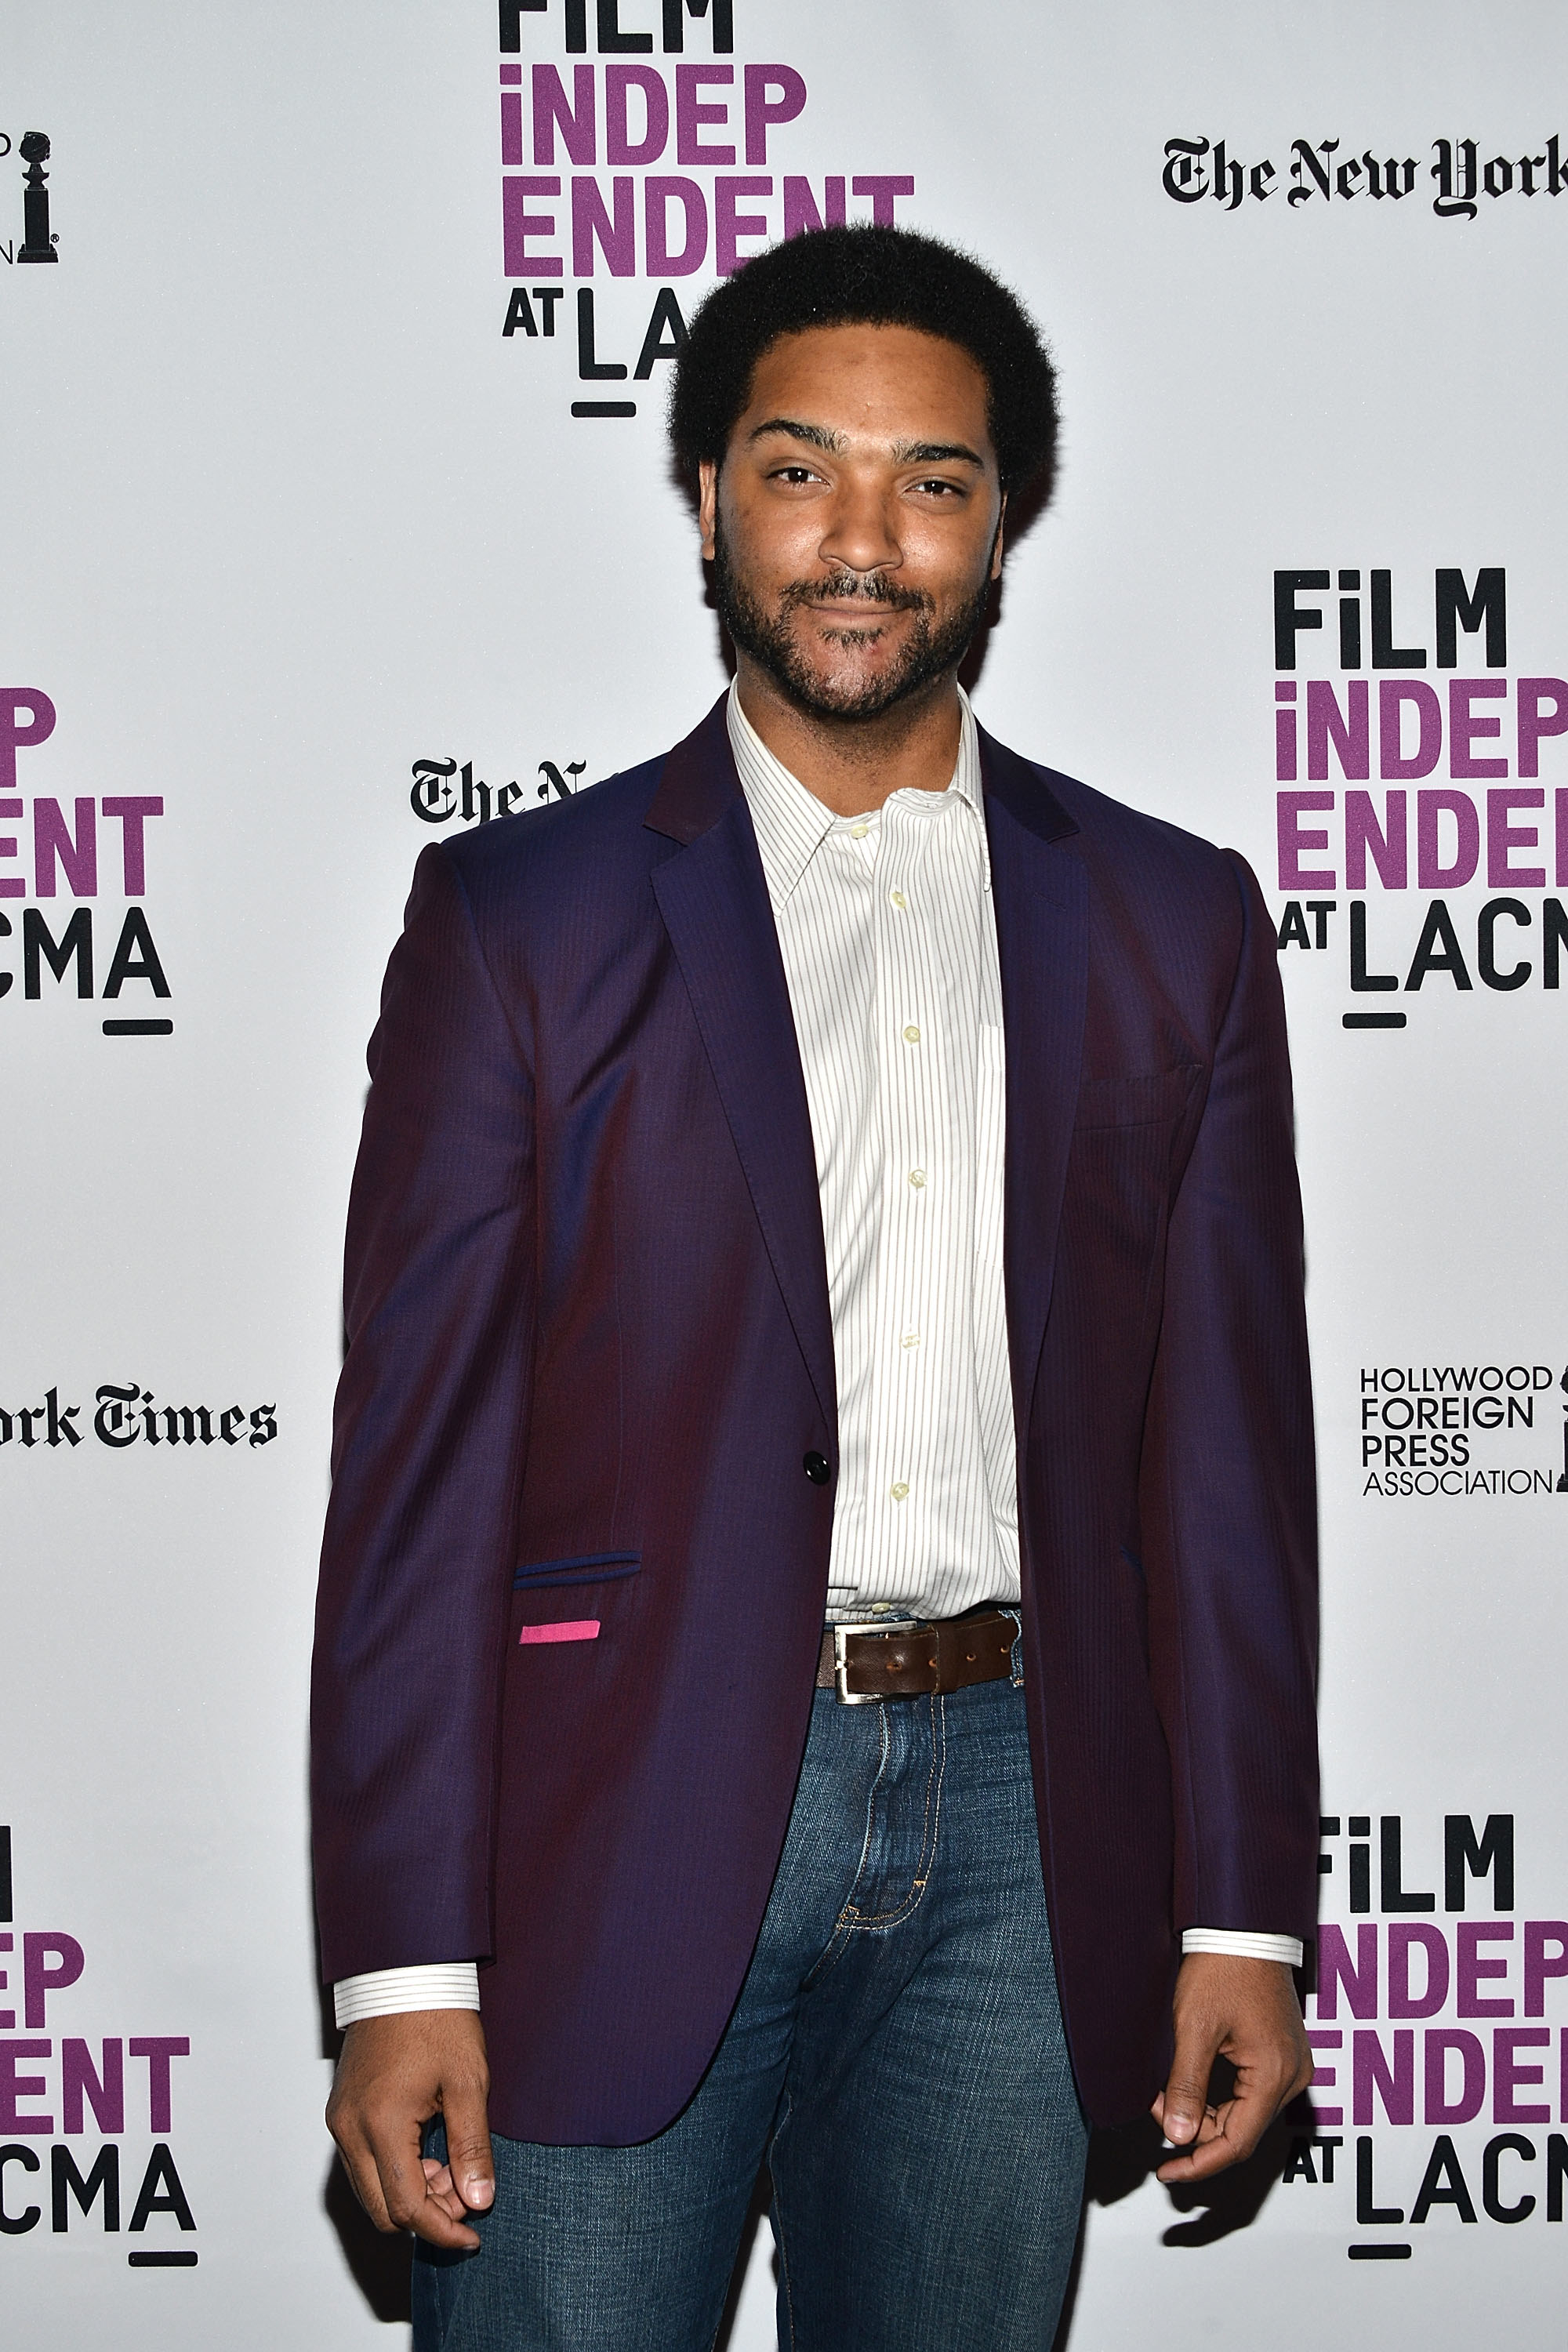 Langston in jeans, shirt, and jacket on the red carpet